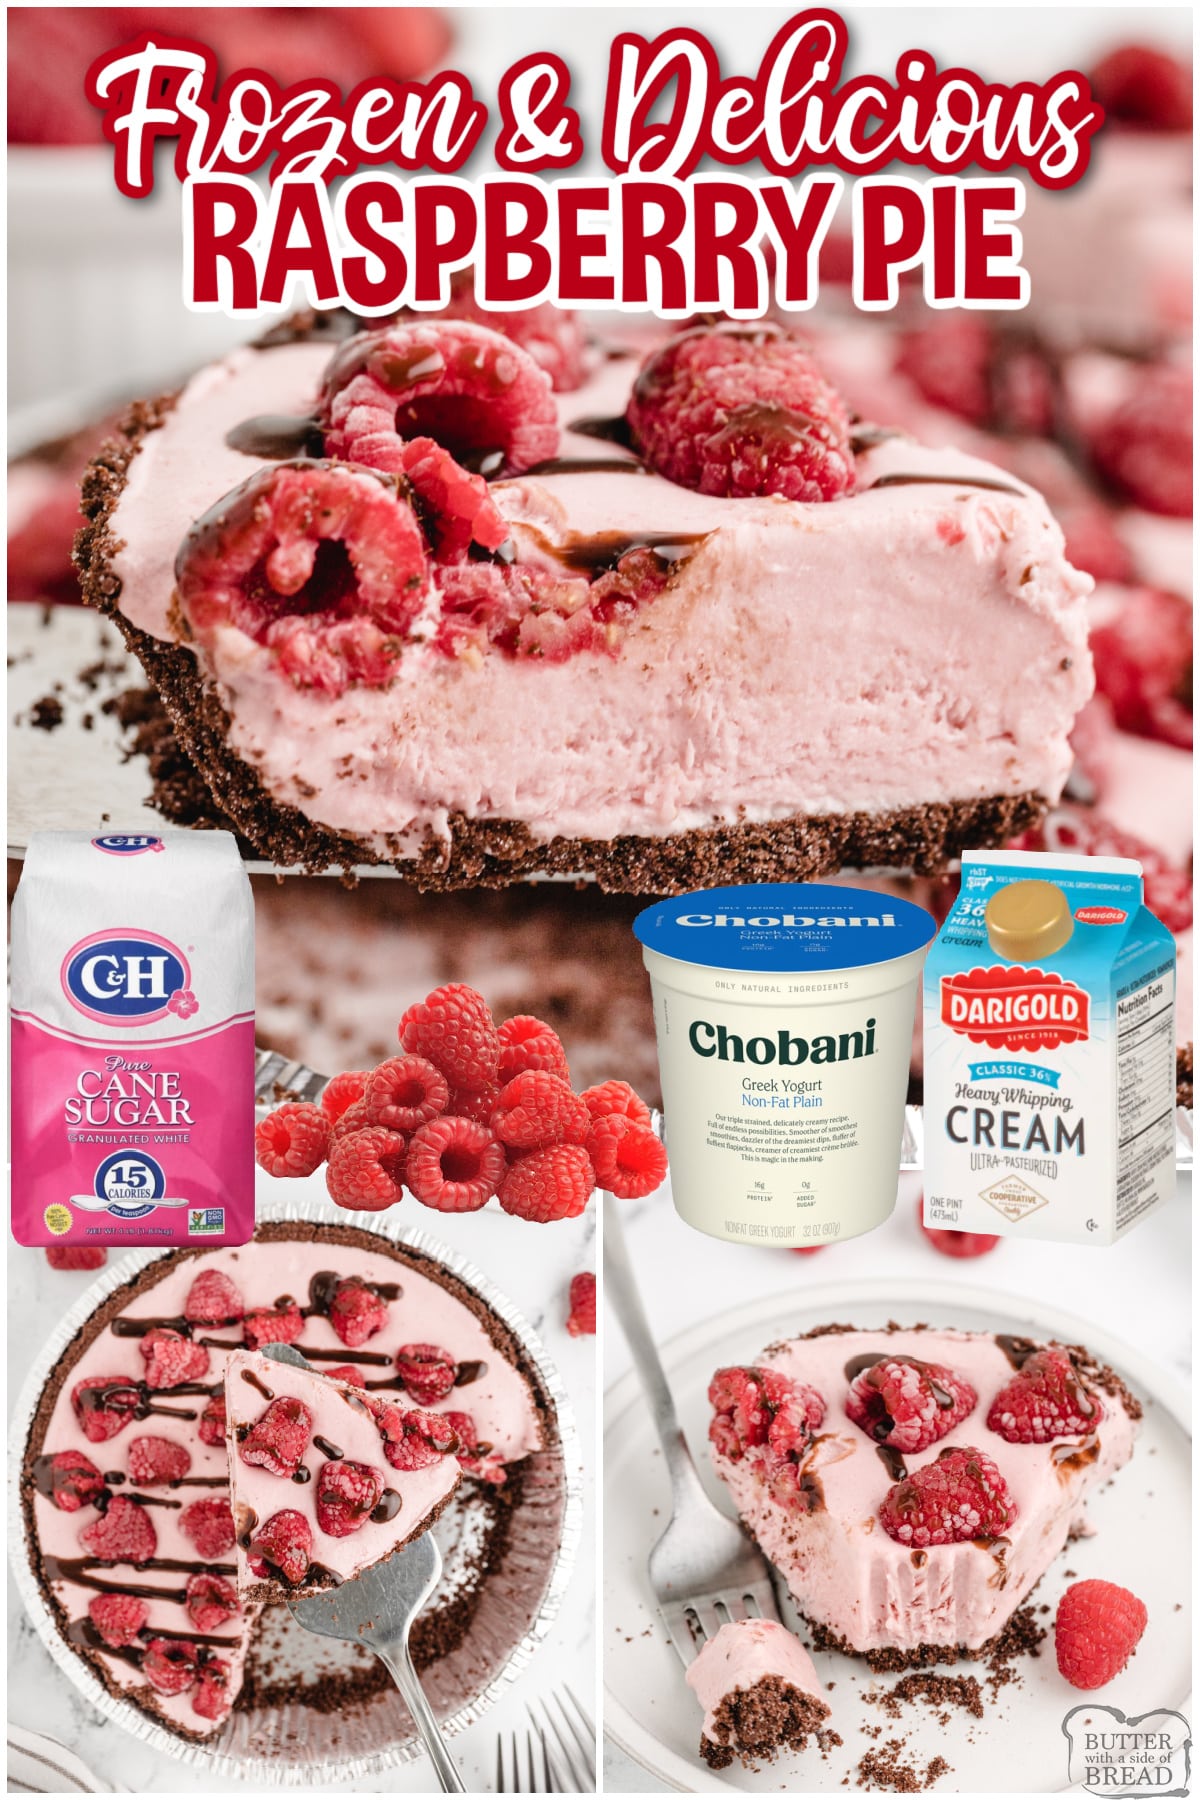 Frozen Raspberry Pie is a refreshing dessert that's perfect for summer. Made with fresh raspberries, an Oreo crust and real whipped cream, this frozen dessert is absolutely delicious!